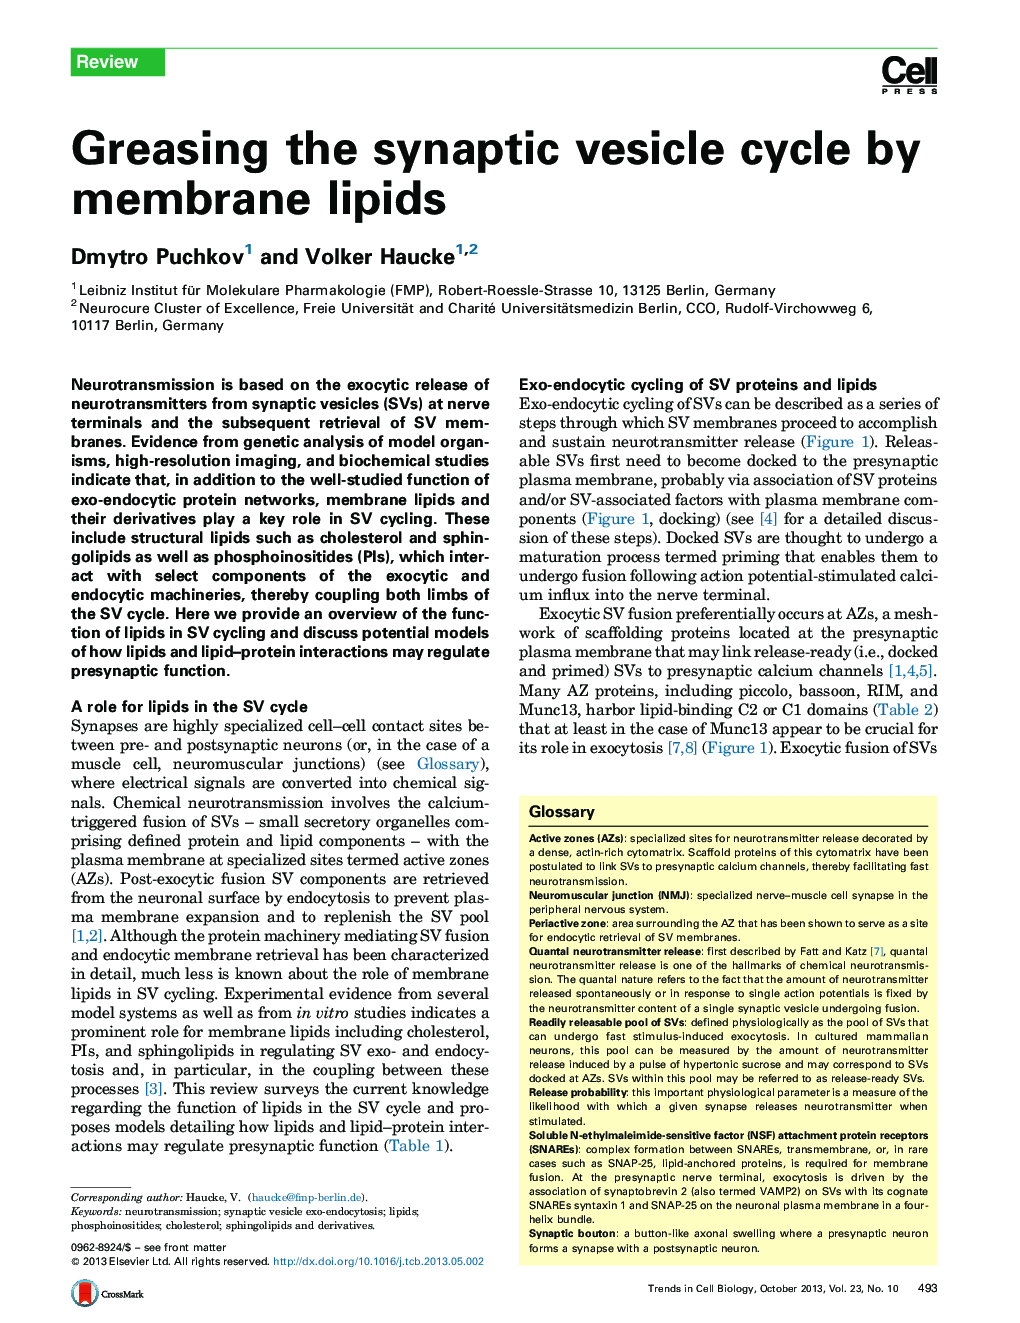 Greasing the synaptic vesicle cycle by membrane lipids